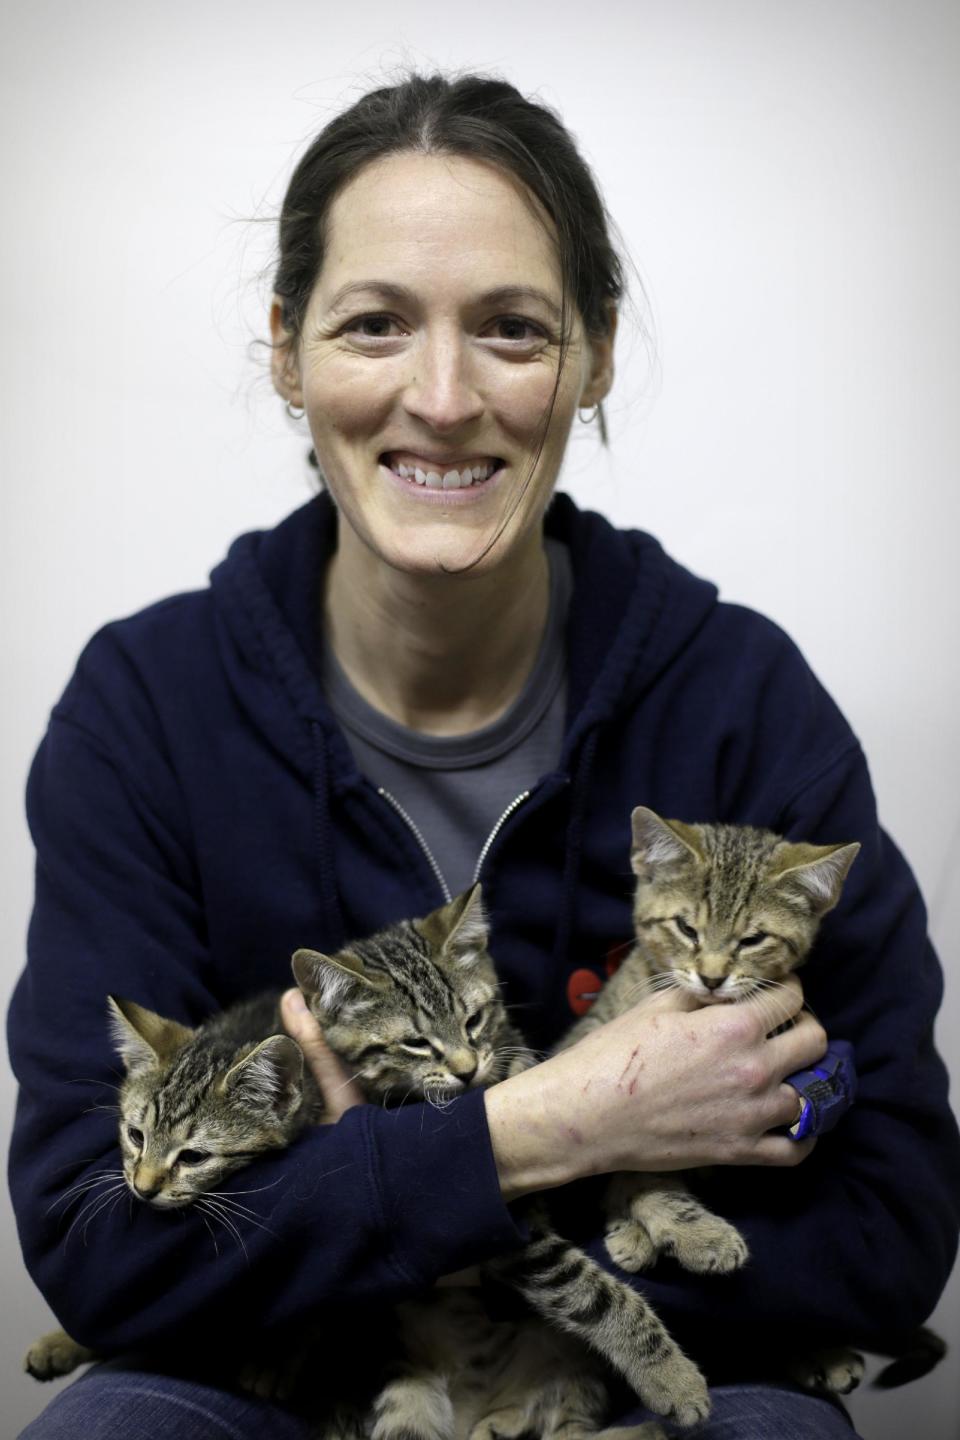 In this Thursday, March 28, 2013 photo, Red Paw founder Jen Leary poses for a portrait at their adoption facility in Philadelphia, with kittens displaced due to fires. The emergency relief service Red Paw has paired with the local Red Cross to care for animals displaced by flames, floods or other residential disasters, with the goal of eventually reuniting them with their owners. (AP Photo/Matt Rourke)